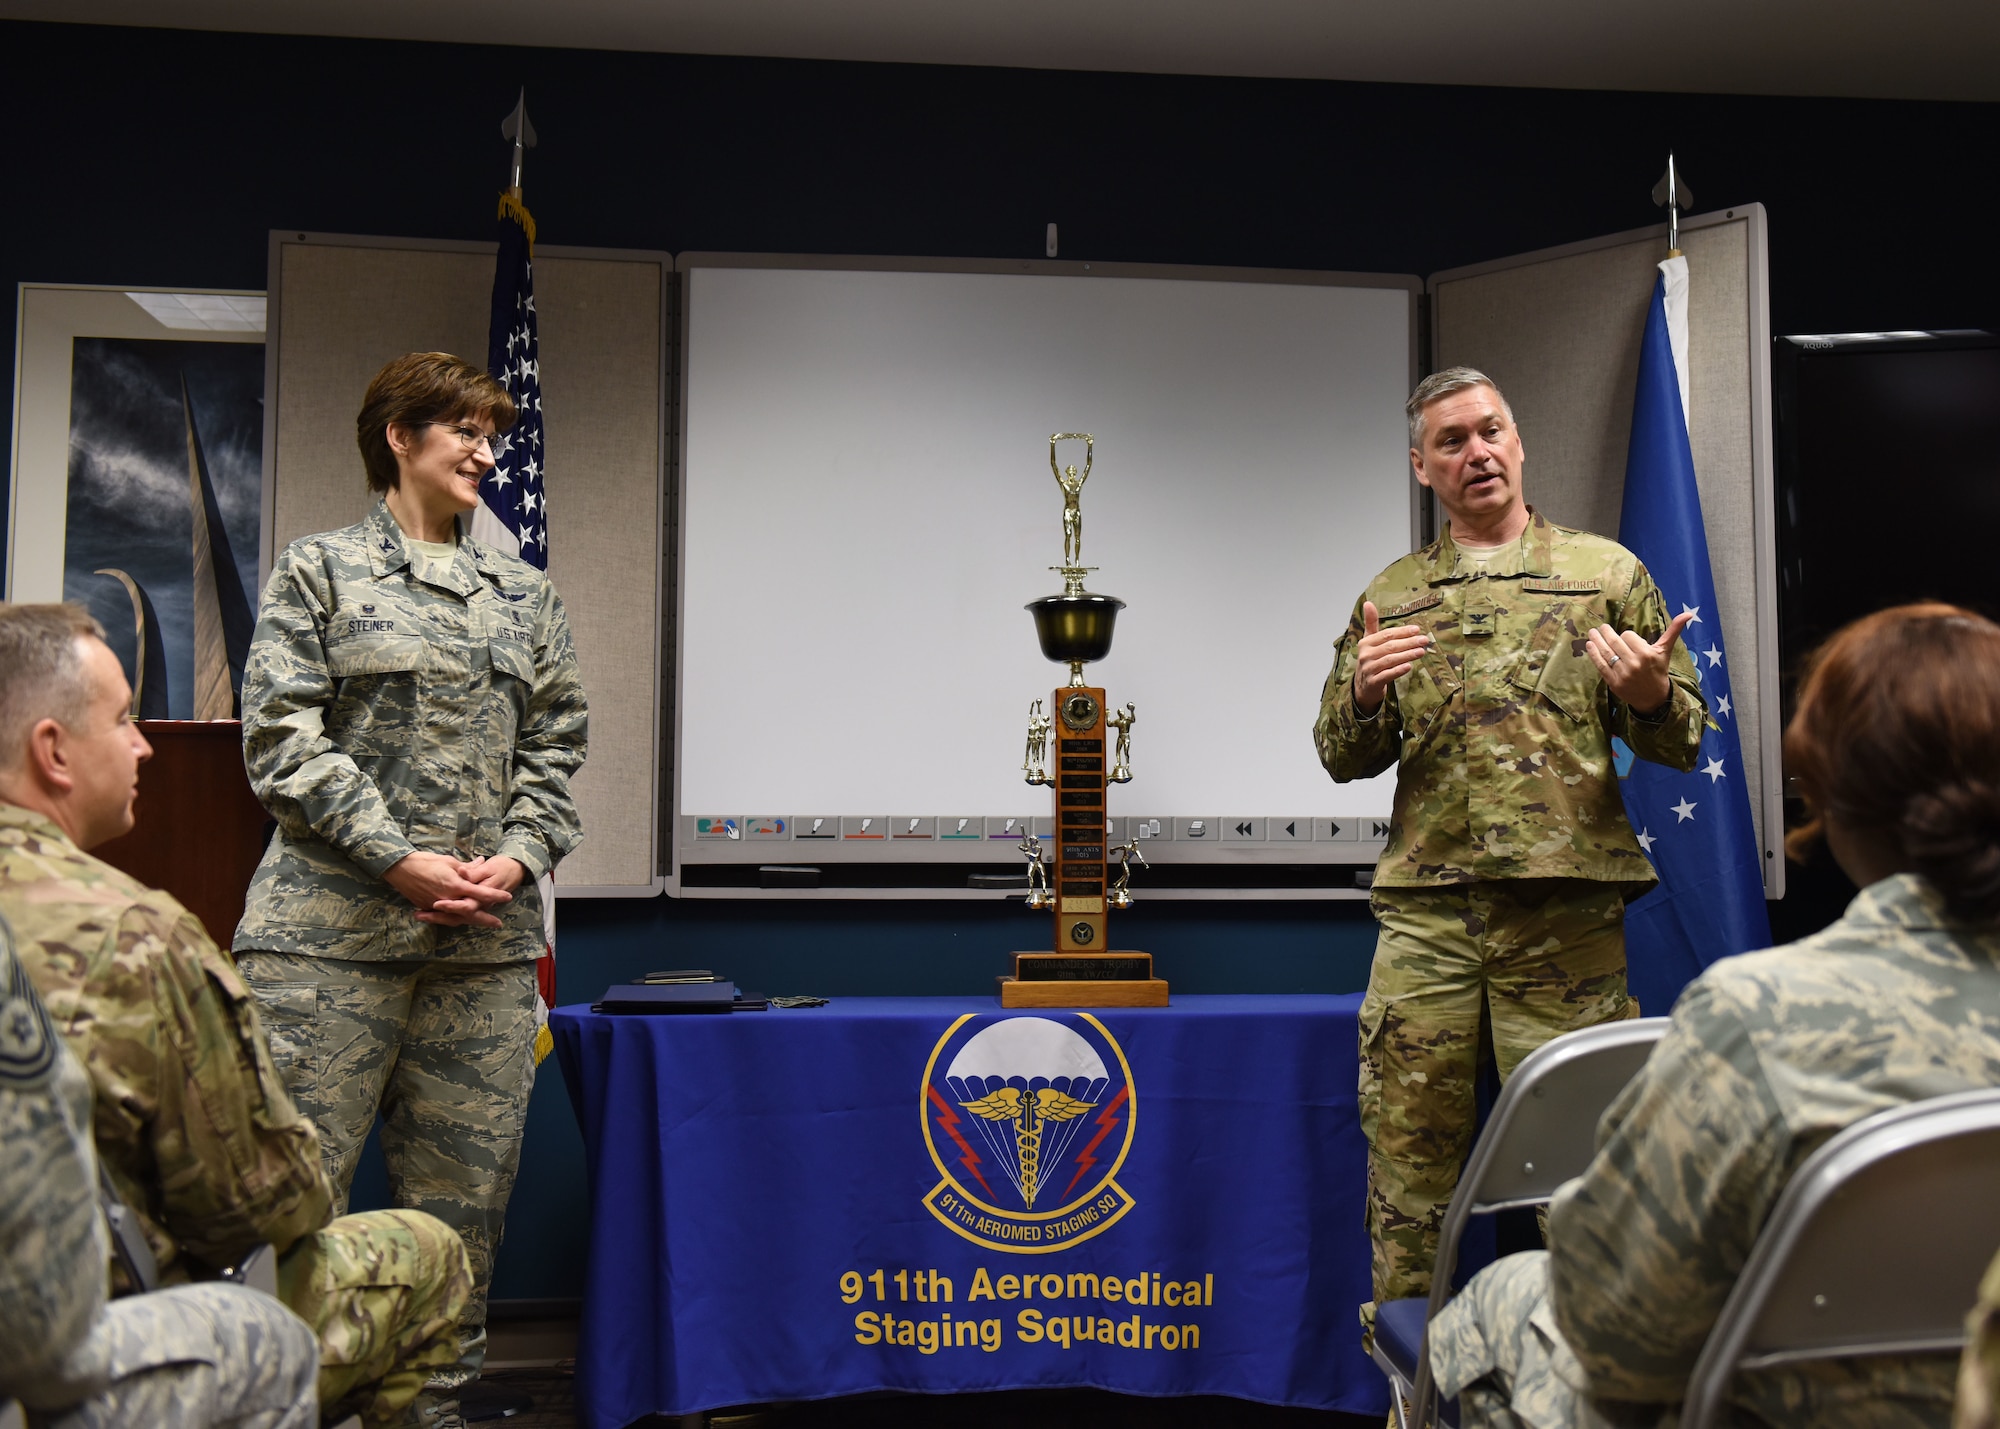 Col. Douglas N. Strawbridge, commander of the 911th Airlift Wing, gives a speech alongside Col. Karen Steiner, commander of the 911th Aeromedical Staging Squadron, and ASTS Airmen at the Pittsburgh International Airport Air Reserve Station, Pennsylvania, December 2, 2018. During his speech, Strawbridge congratulated the squadron on its hard work during the wing intramural sports competition. (U.S. Air Force Photo by Senior Airman Grace Thomson)